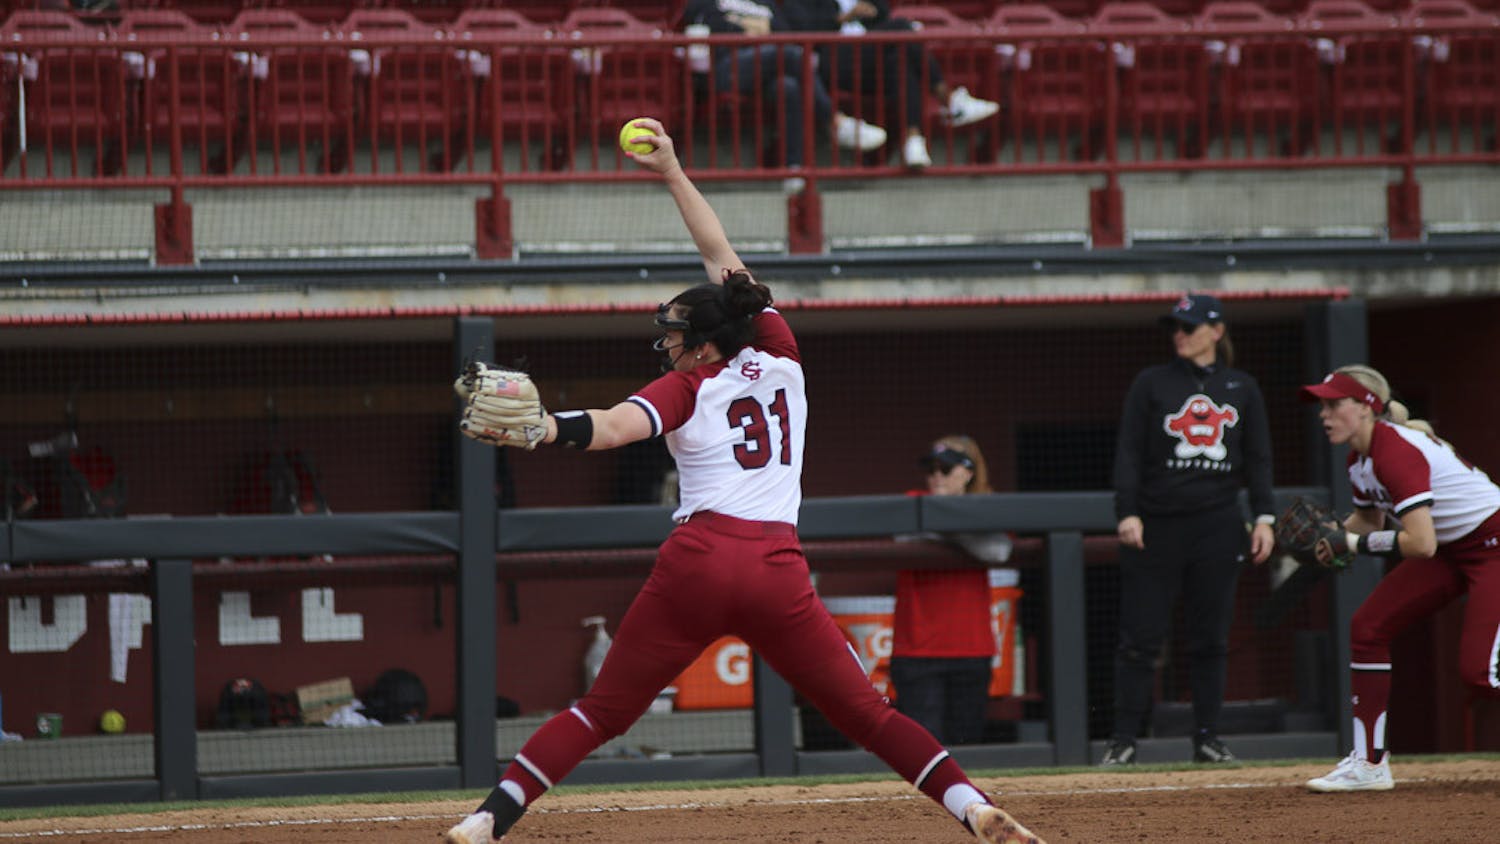 Senior pitcher Karsen Ochs throws a pitch during the match against Western Kentucky University at Beckham Field on Feb. 19, 2023. The Gamecocks beat the Hilltoppers 11-2.